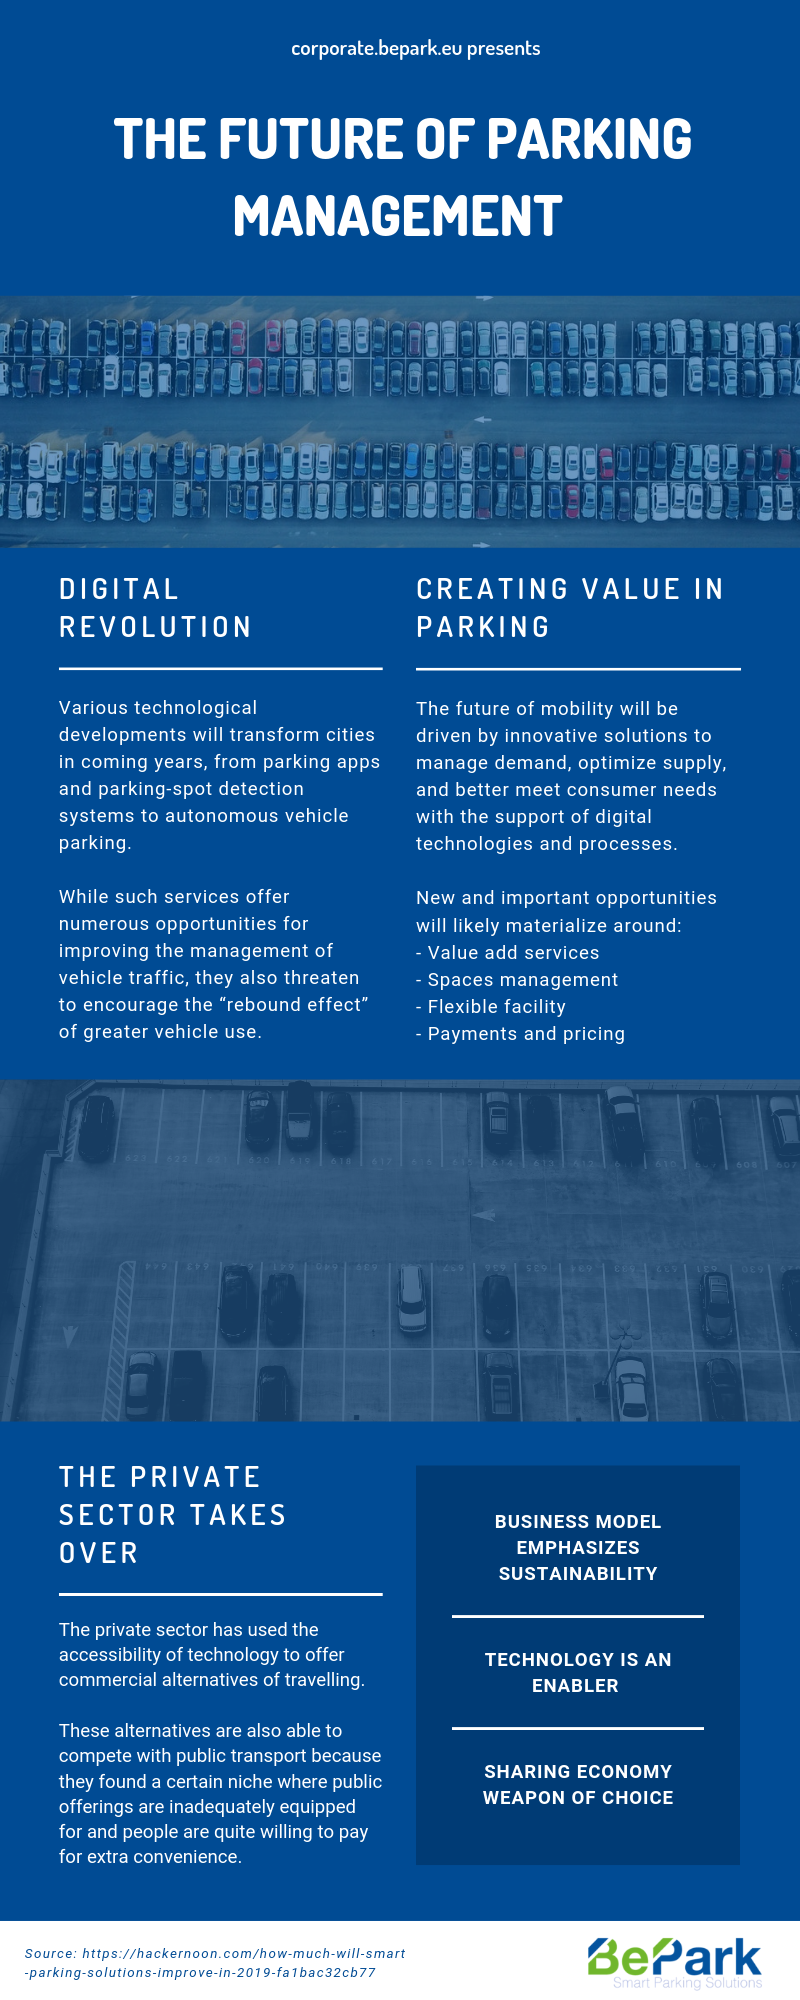 The future of parking management